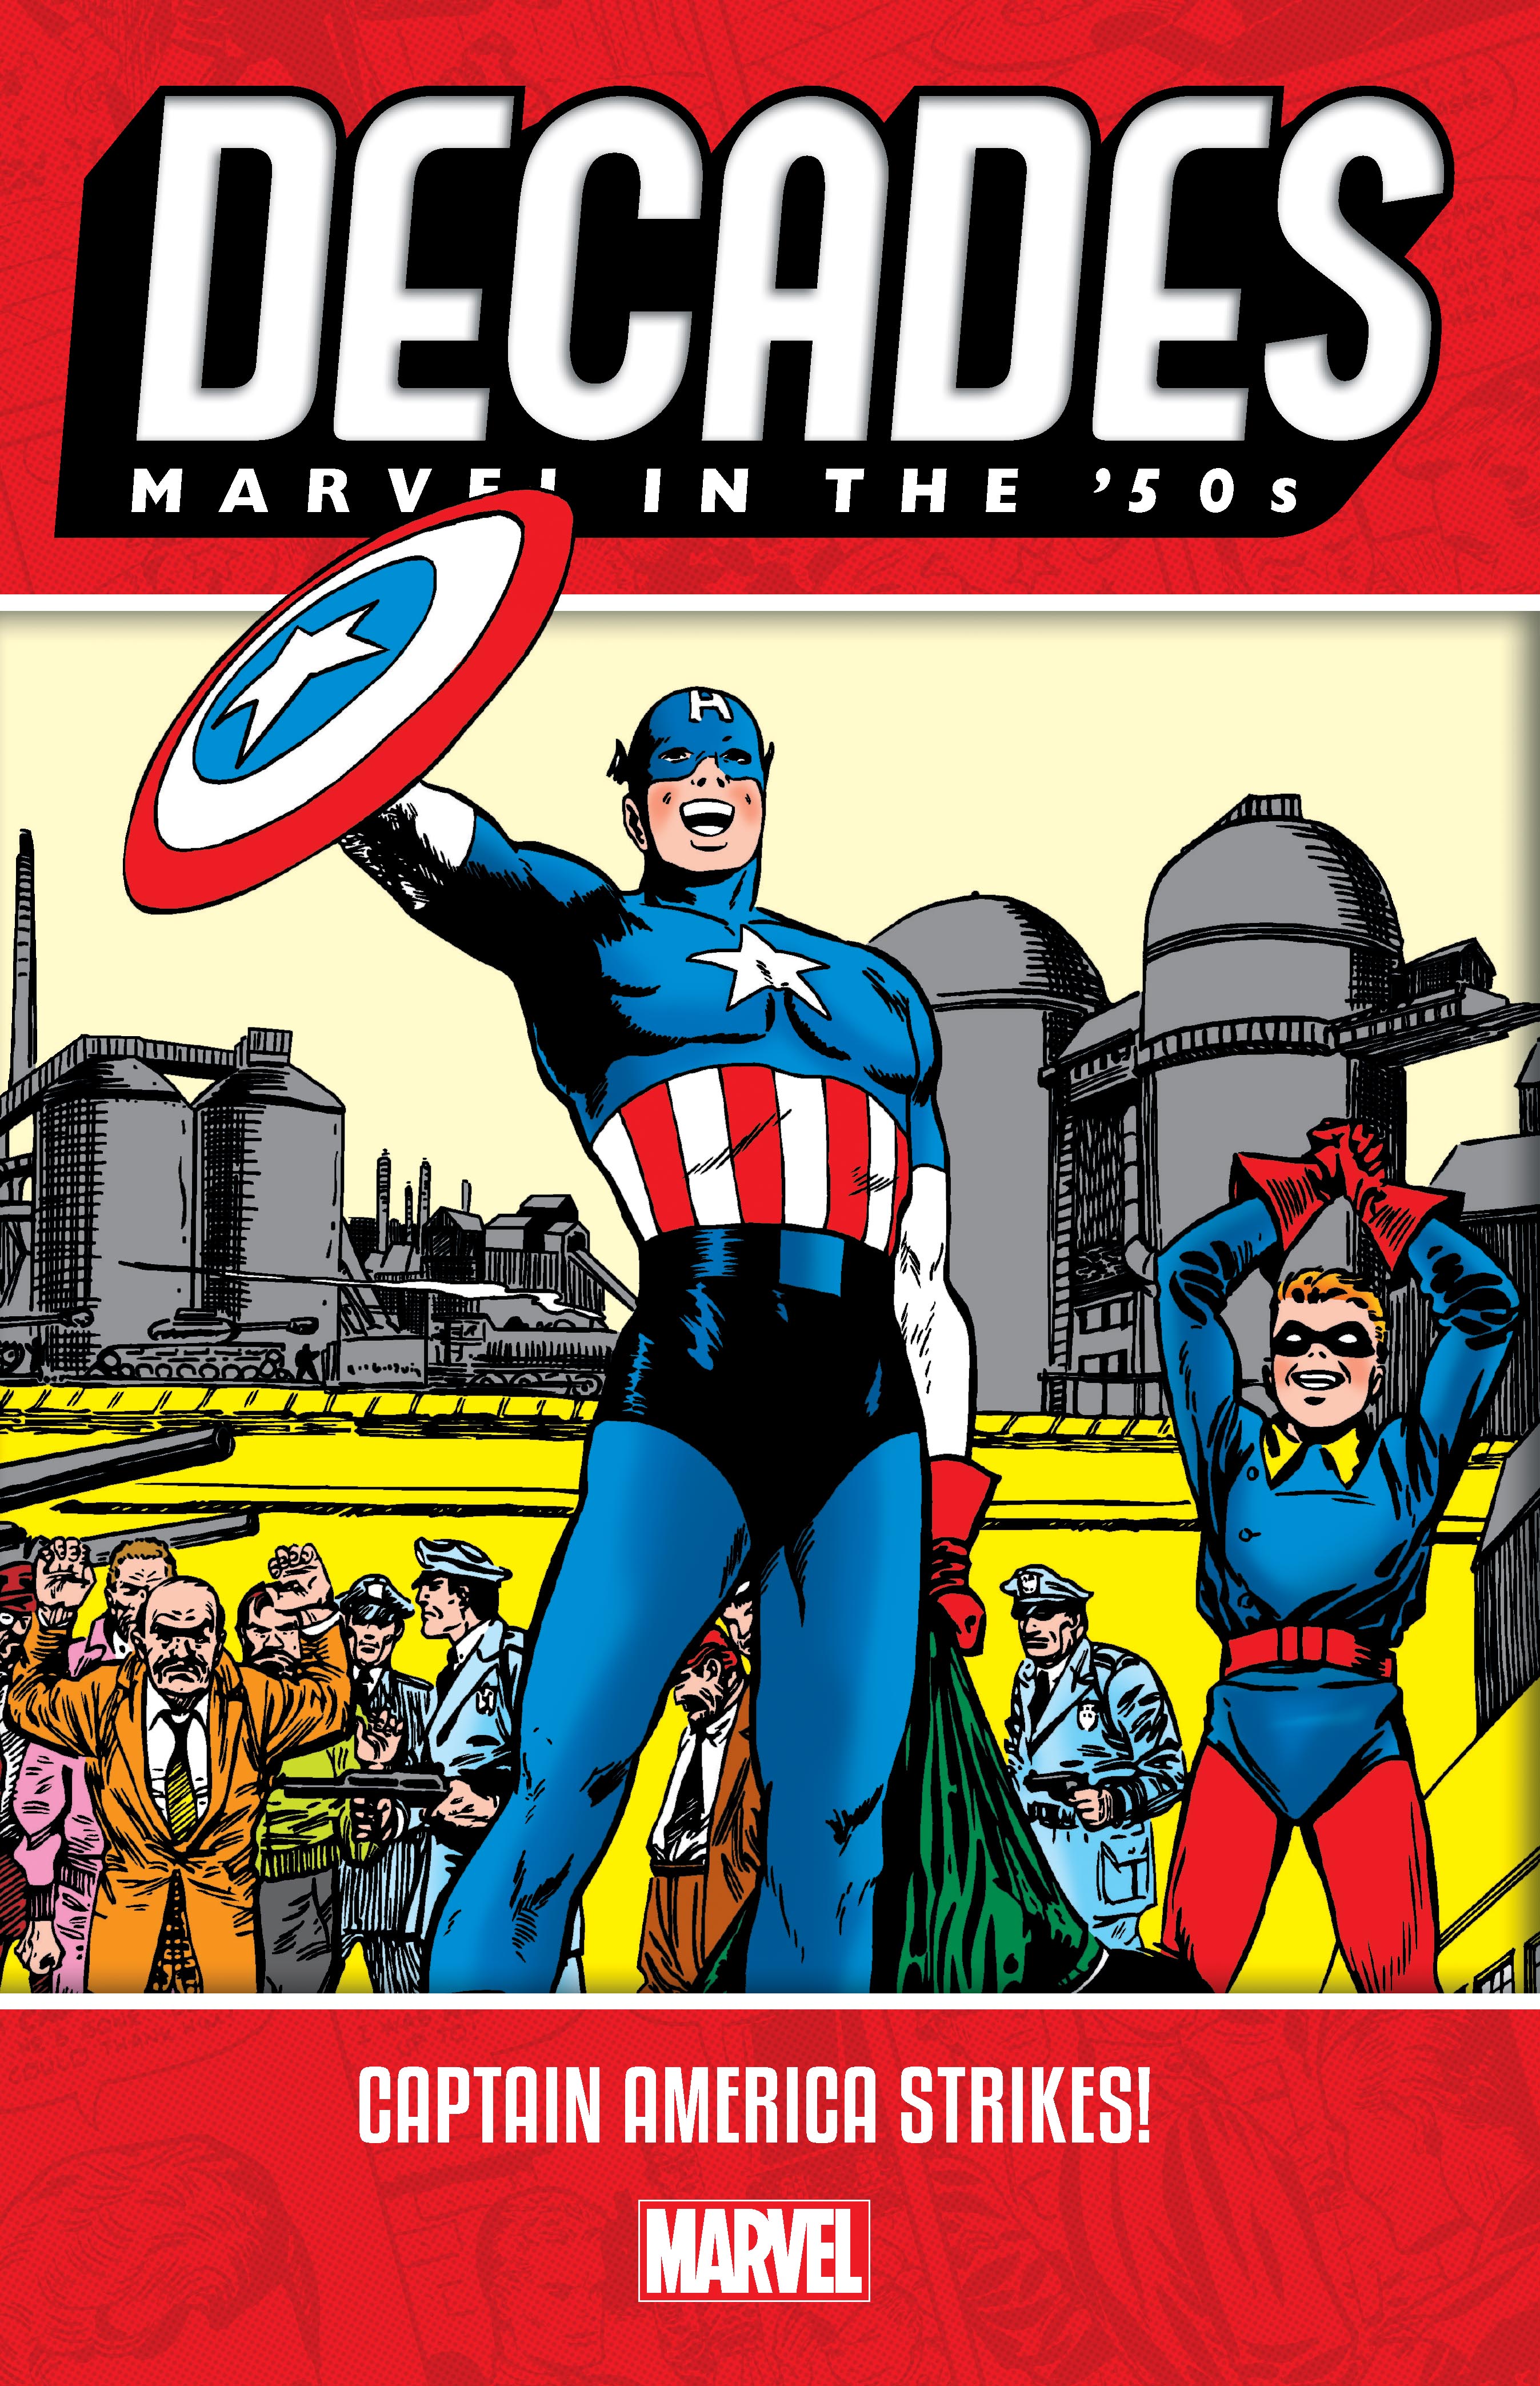 Decades: Marvel In The '50s - Captain America Strikes! (Trade Paperback)